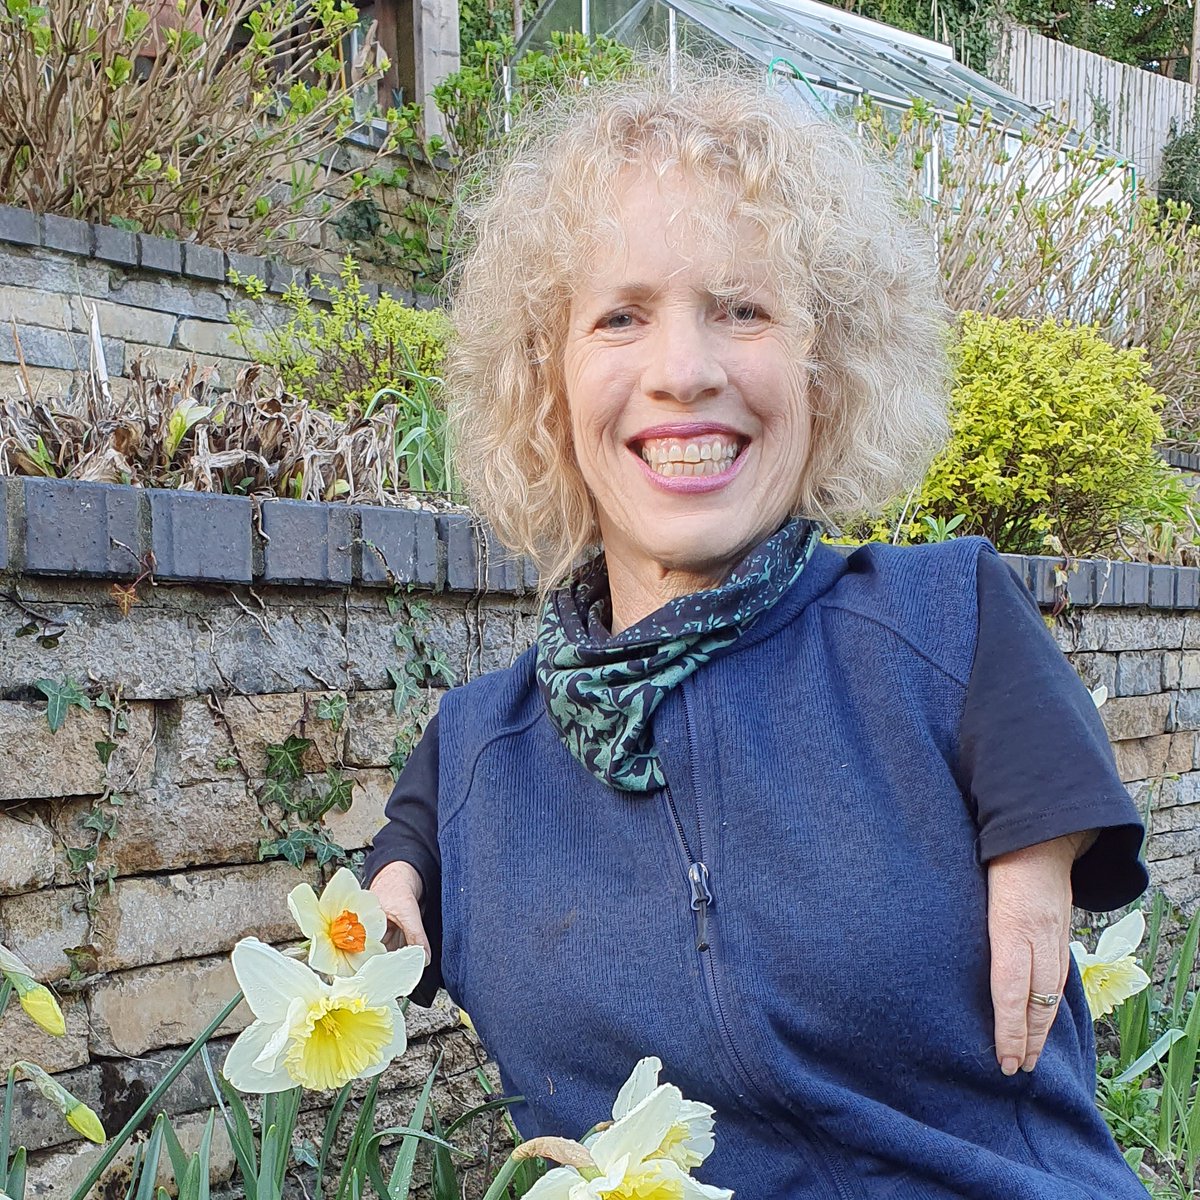 We're catching up with @suekentathome tonight as she makes a start on planting up her new hot borders. See you at 8 o'clock on @BBCTwo 🙂 🌹 🌿 #FlowersOnFriday #GardenersWorld #FridayFeeling #Gardening